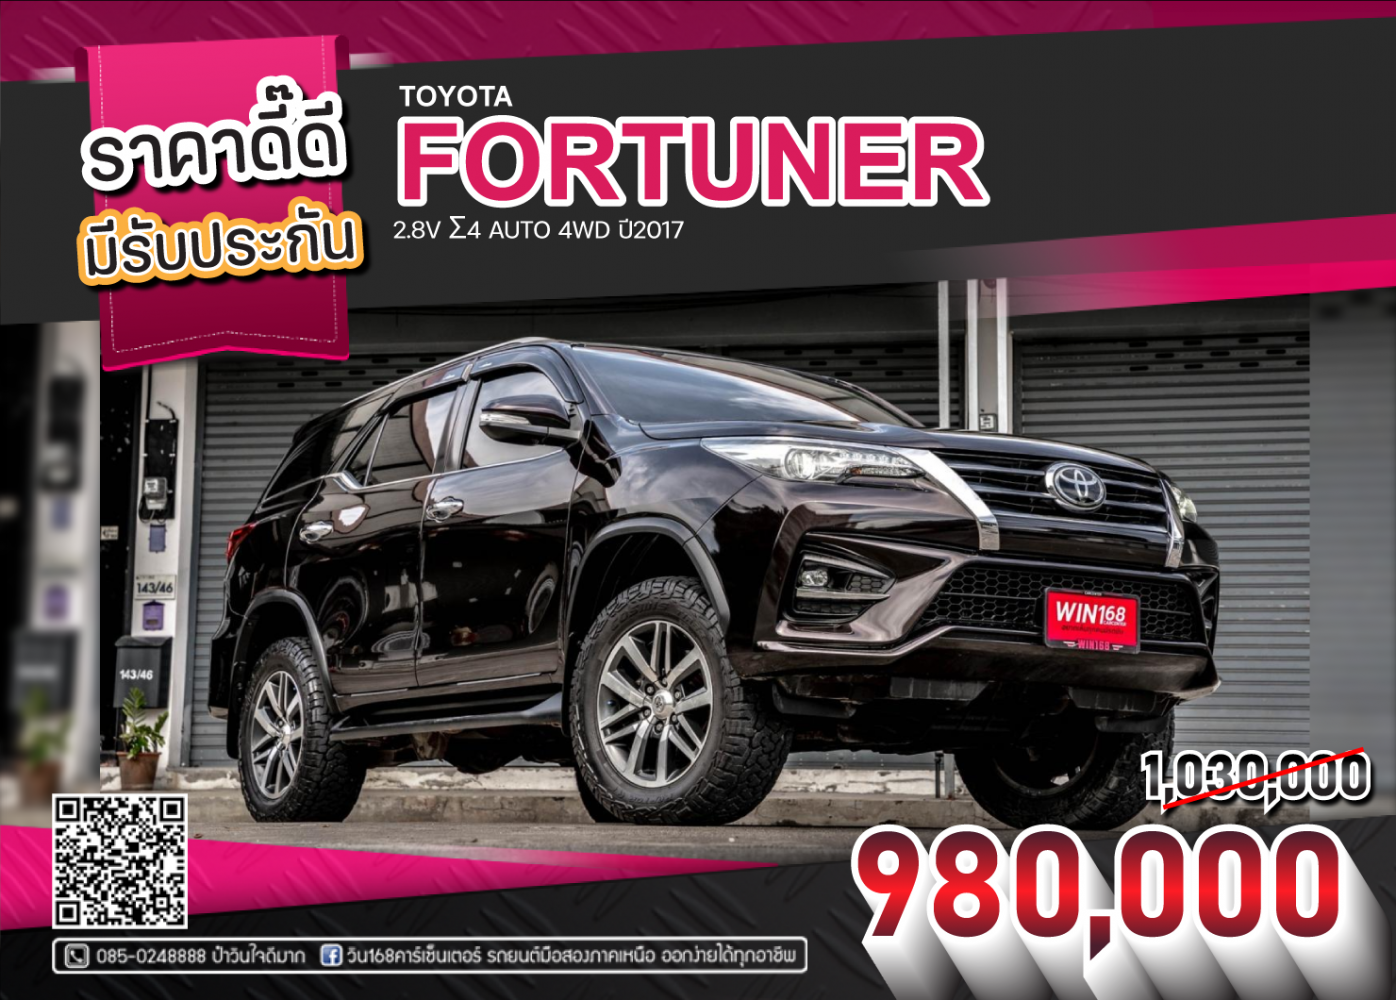 TOYOTA FORTUNER 2.8V Σ4 AUTO 4WD ปี2017 (T280)